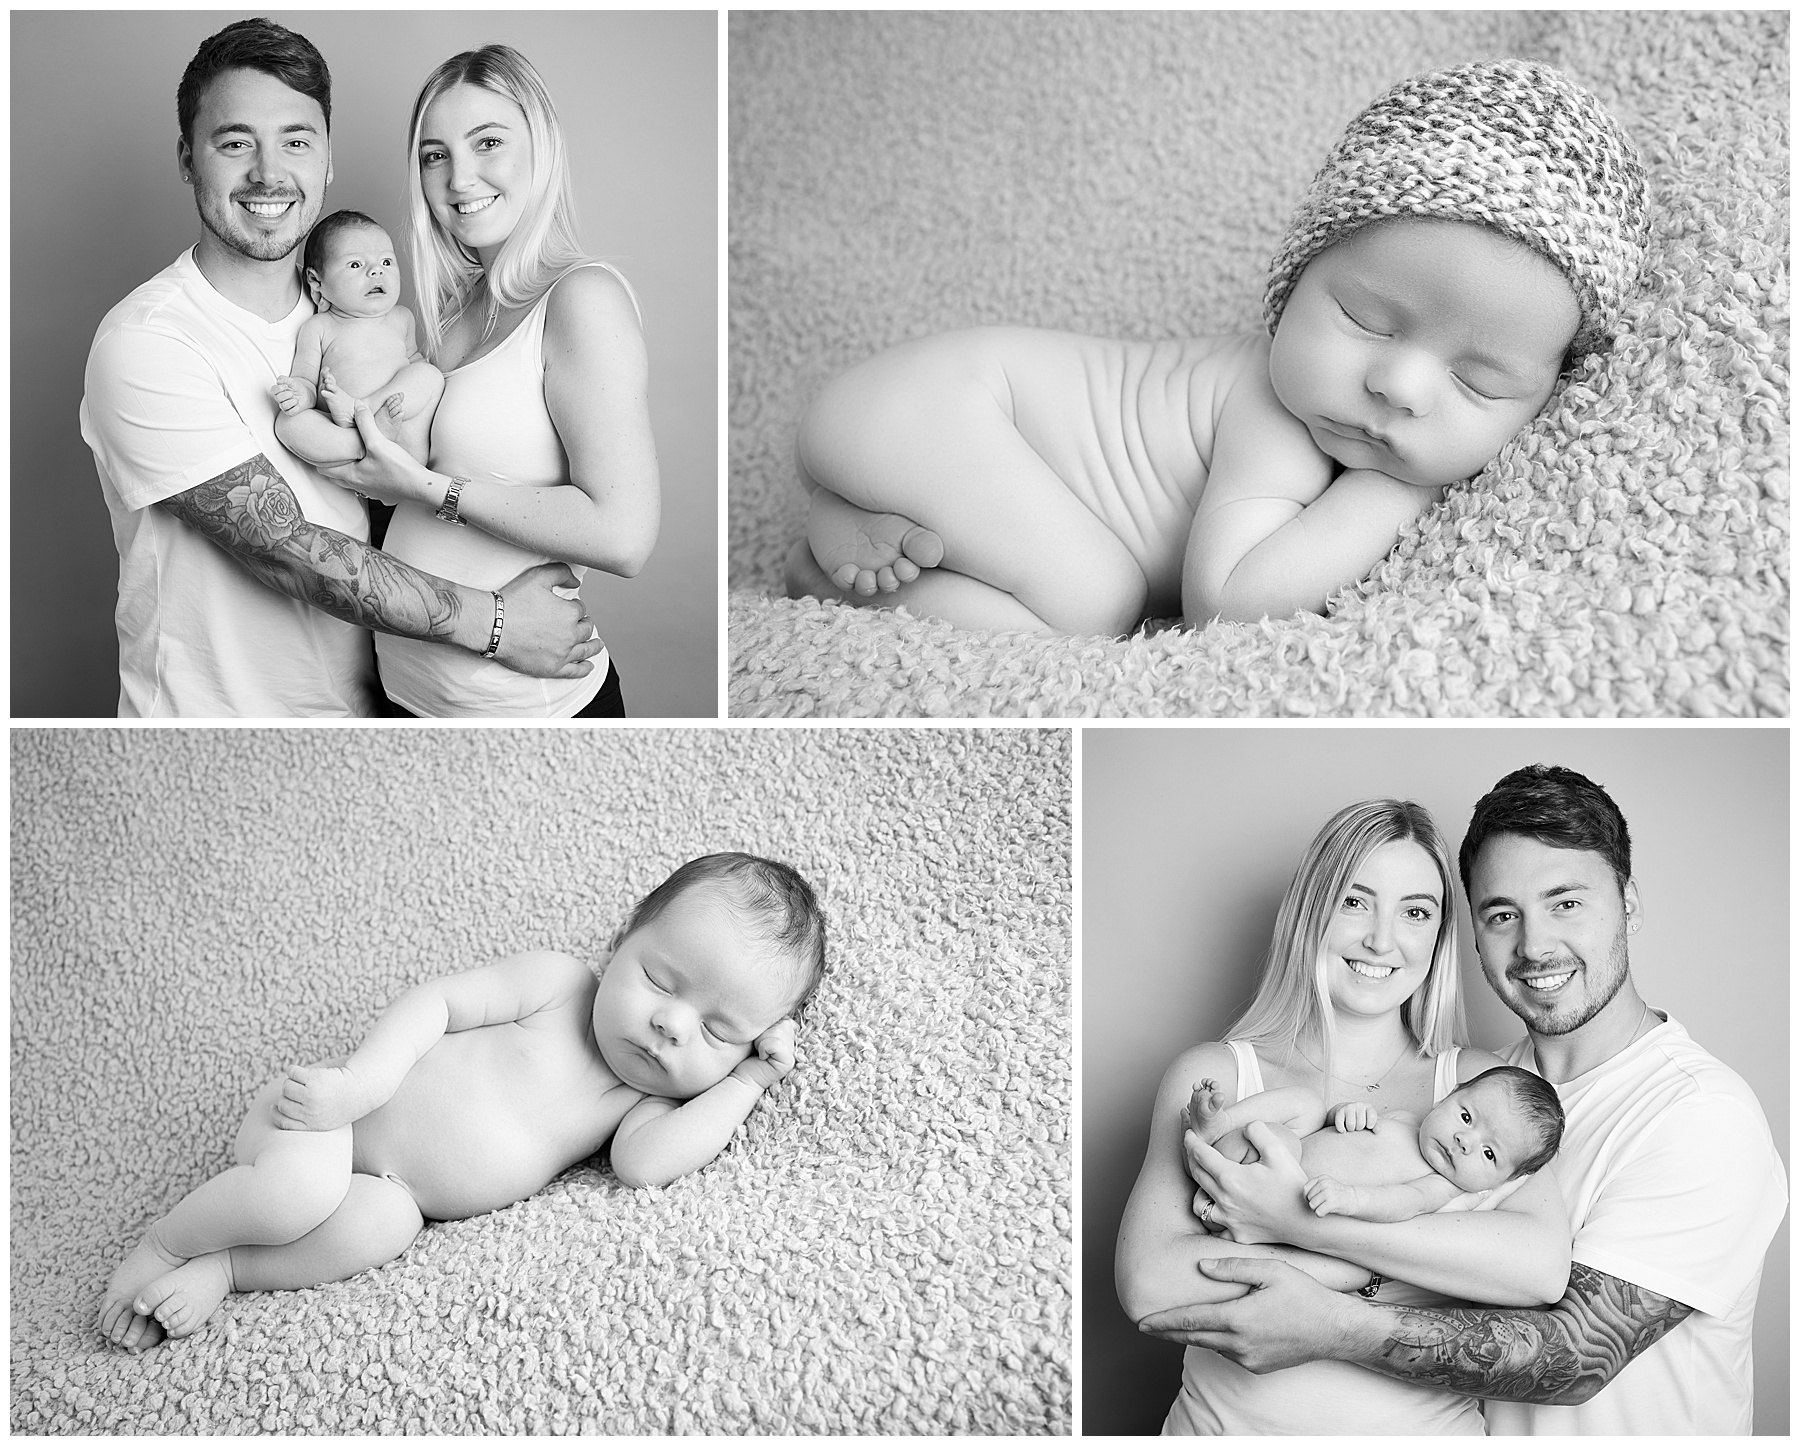 Black and white newborn photos of baby boy with bis parents during a newborn photography shoot with Dorset newborn photographer